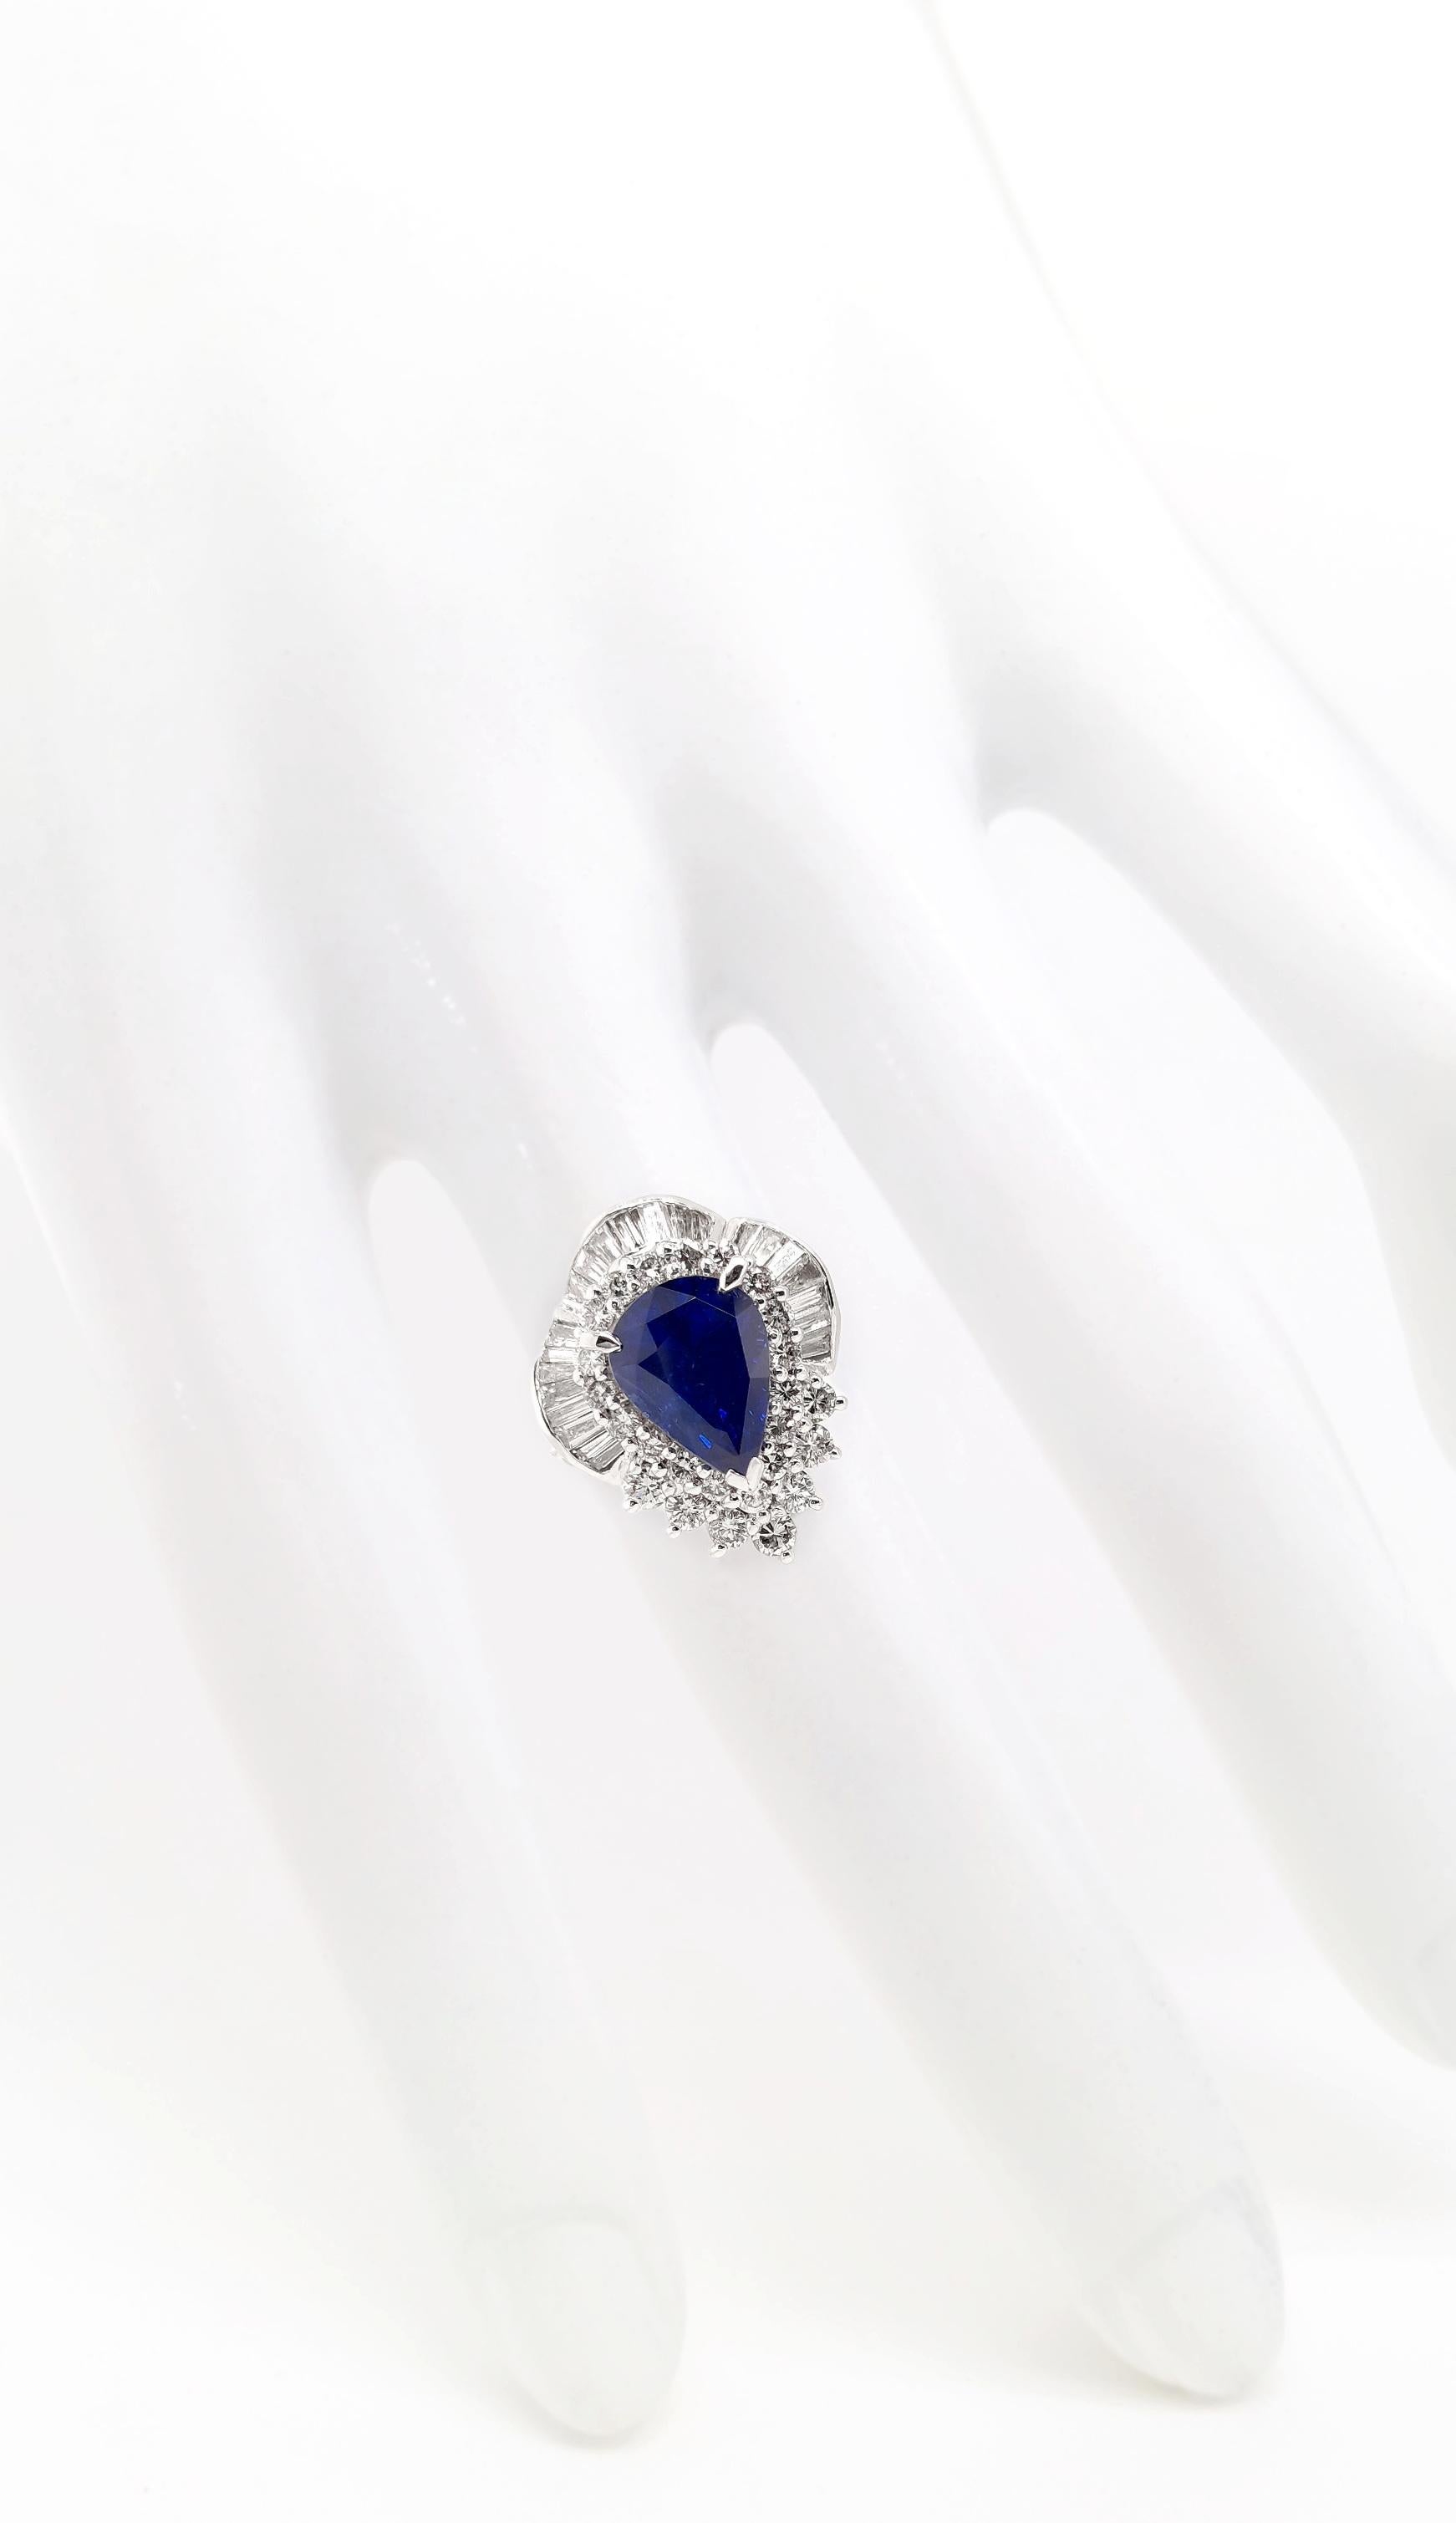 IGI Certified 5.79ct Kashmir Sapphire Vivid Blue 1.73ct Diamonds Platinum Ring In New Condition For Sale In Hong Kong, HK